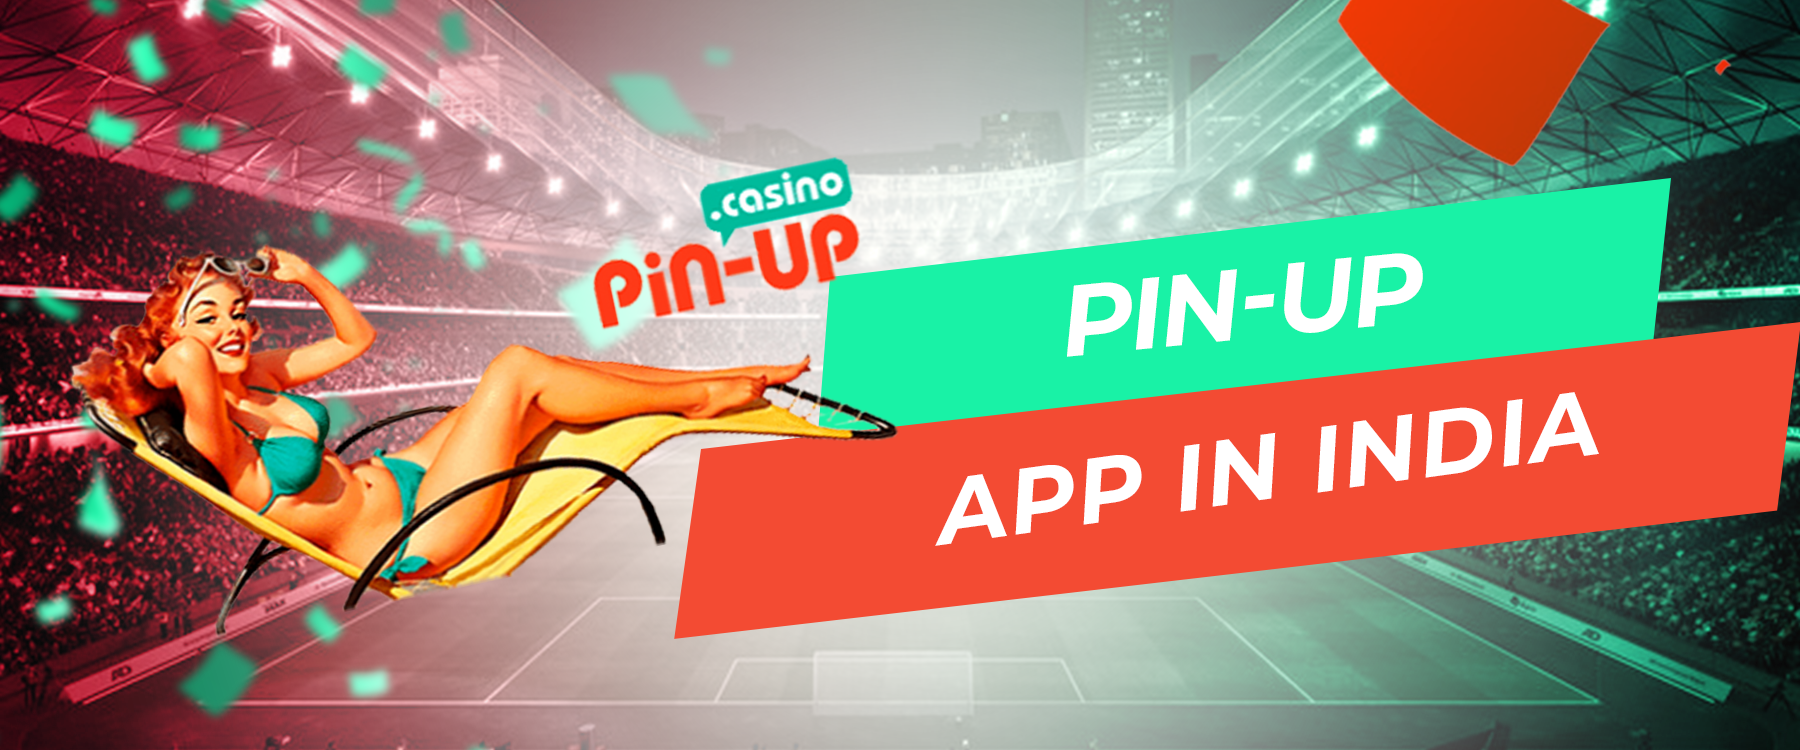 Pin Up App in India